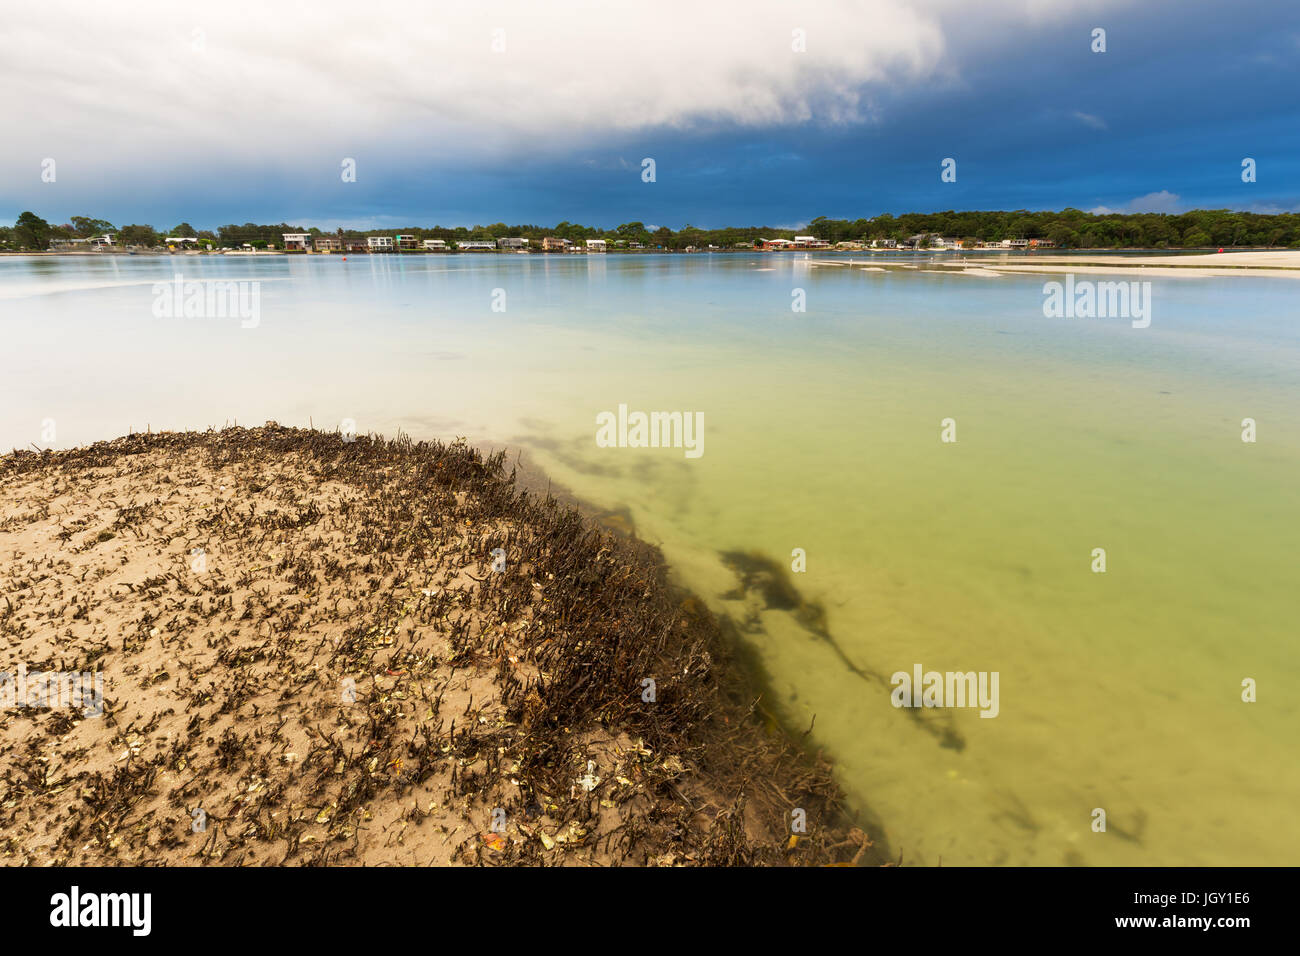 A storm passes over a tranquil river and mangrove system in eastern Australia. Stock Photo